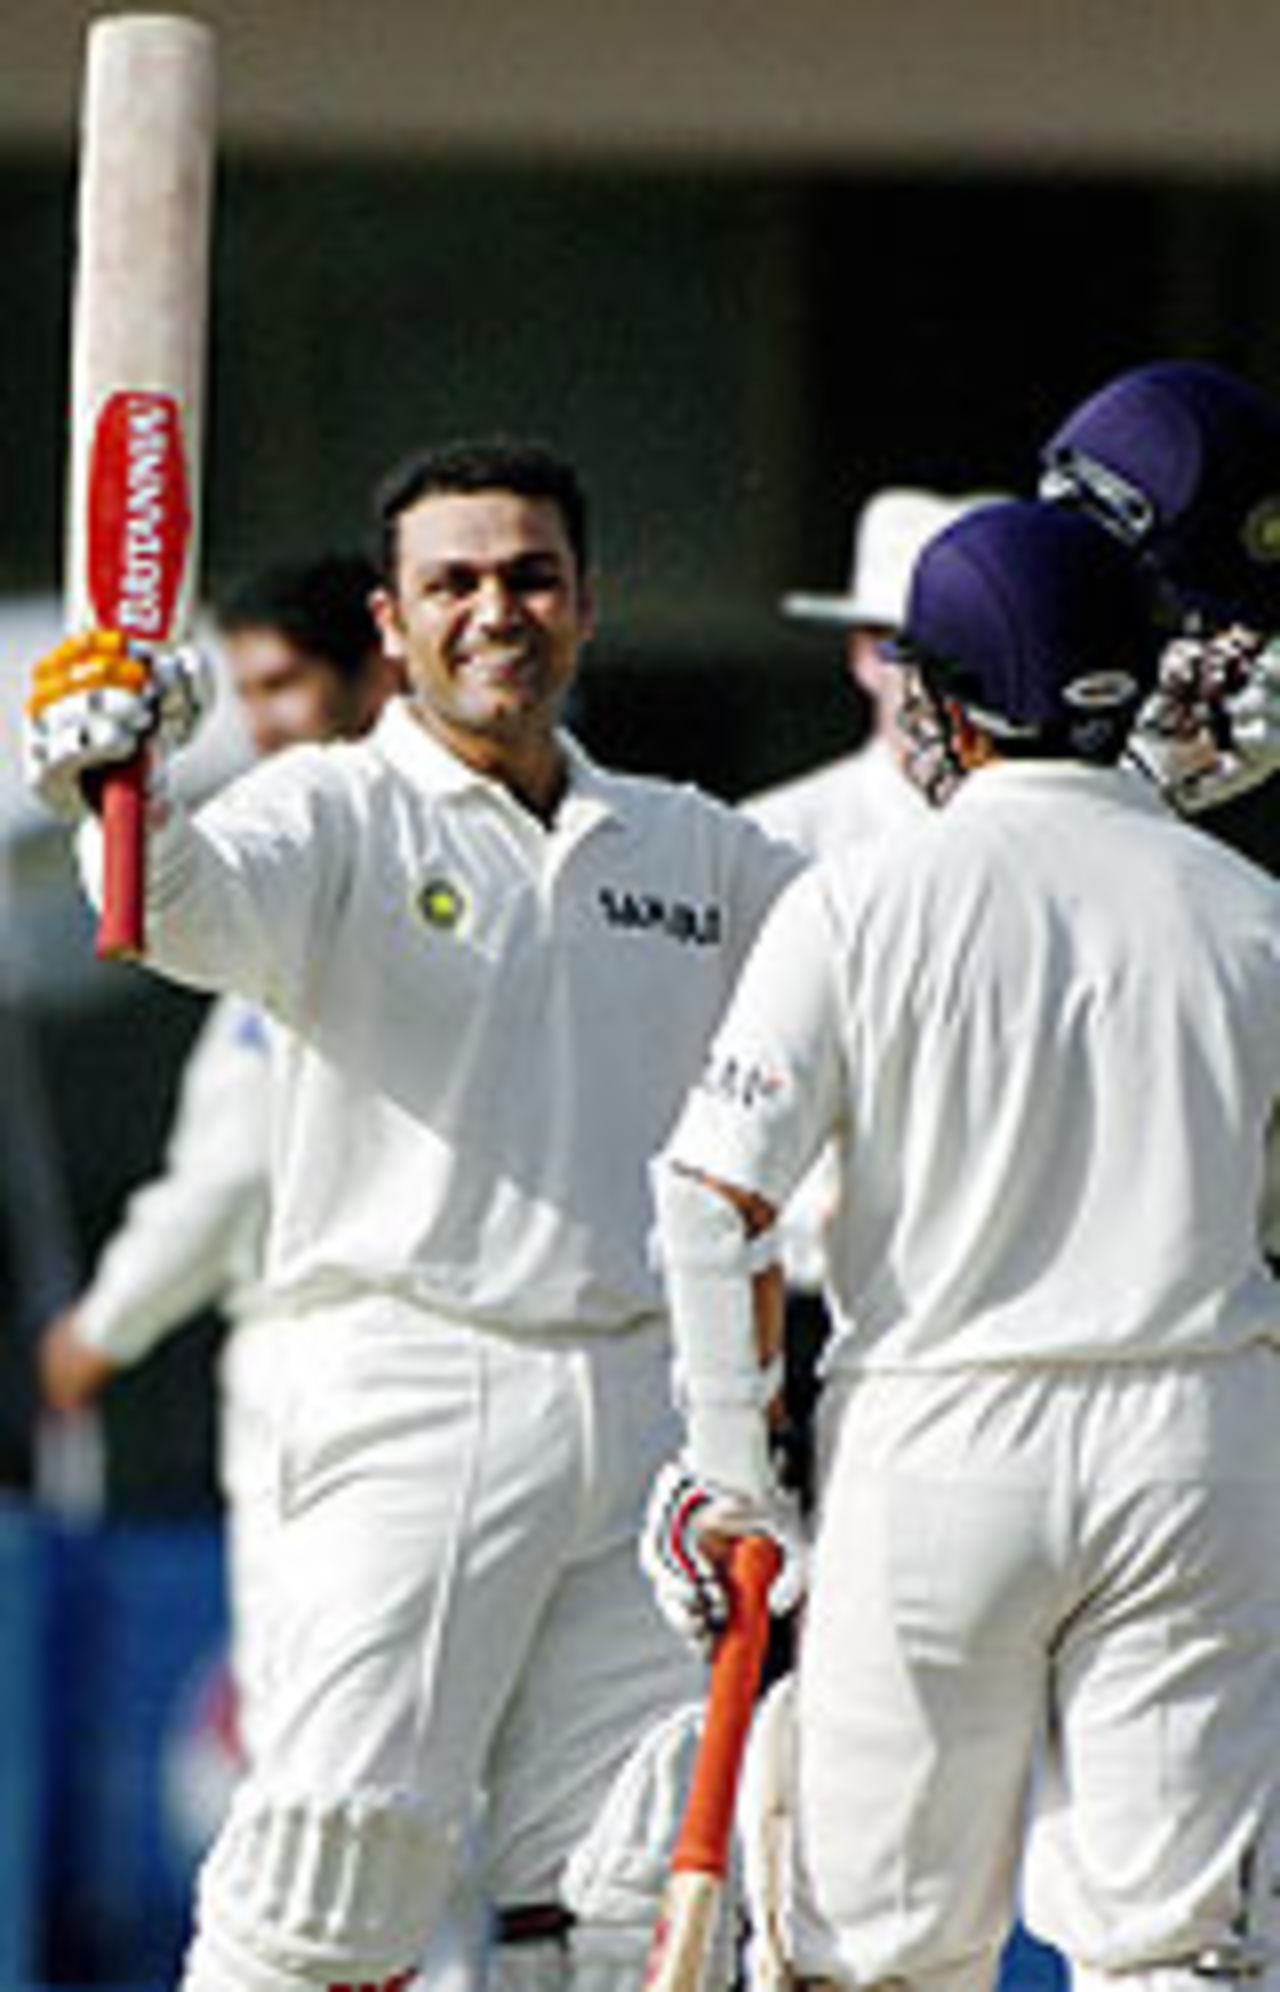 Virender Sehwag raises his bat on reaching 200, Pakistan v India, 1st Test, Multan, 1st day, March 28, 2004